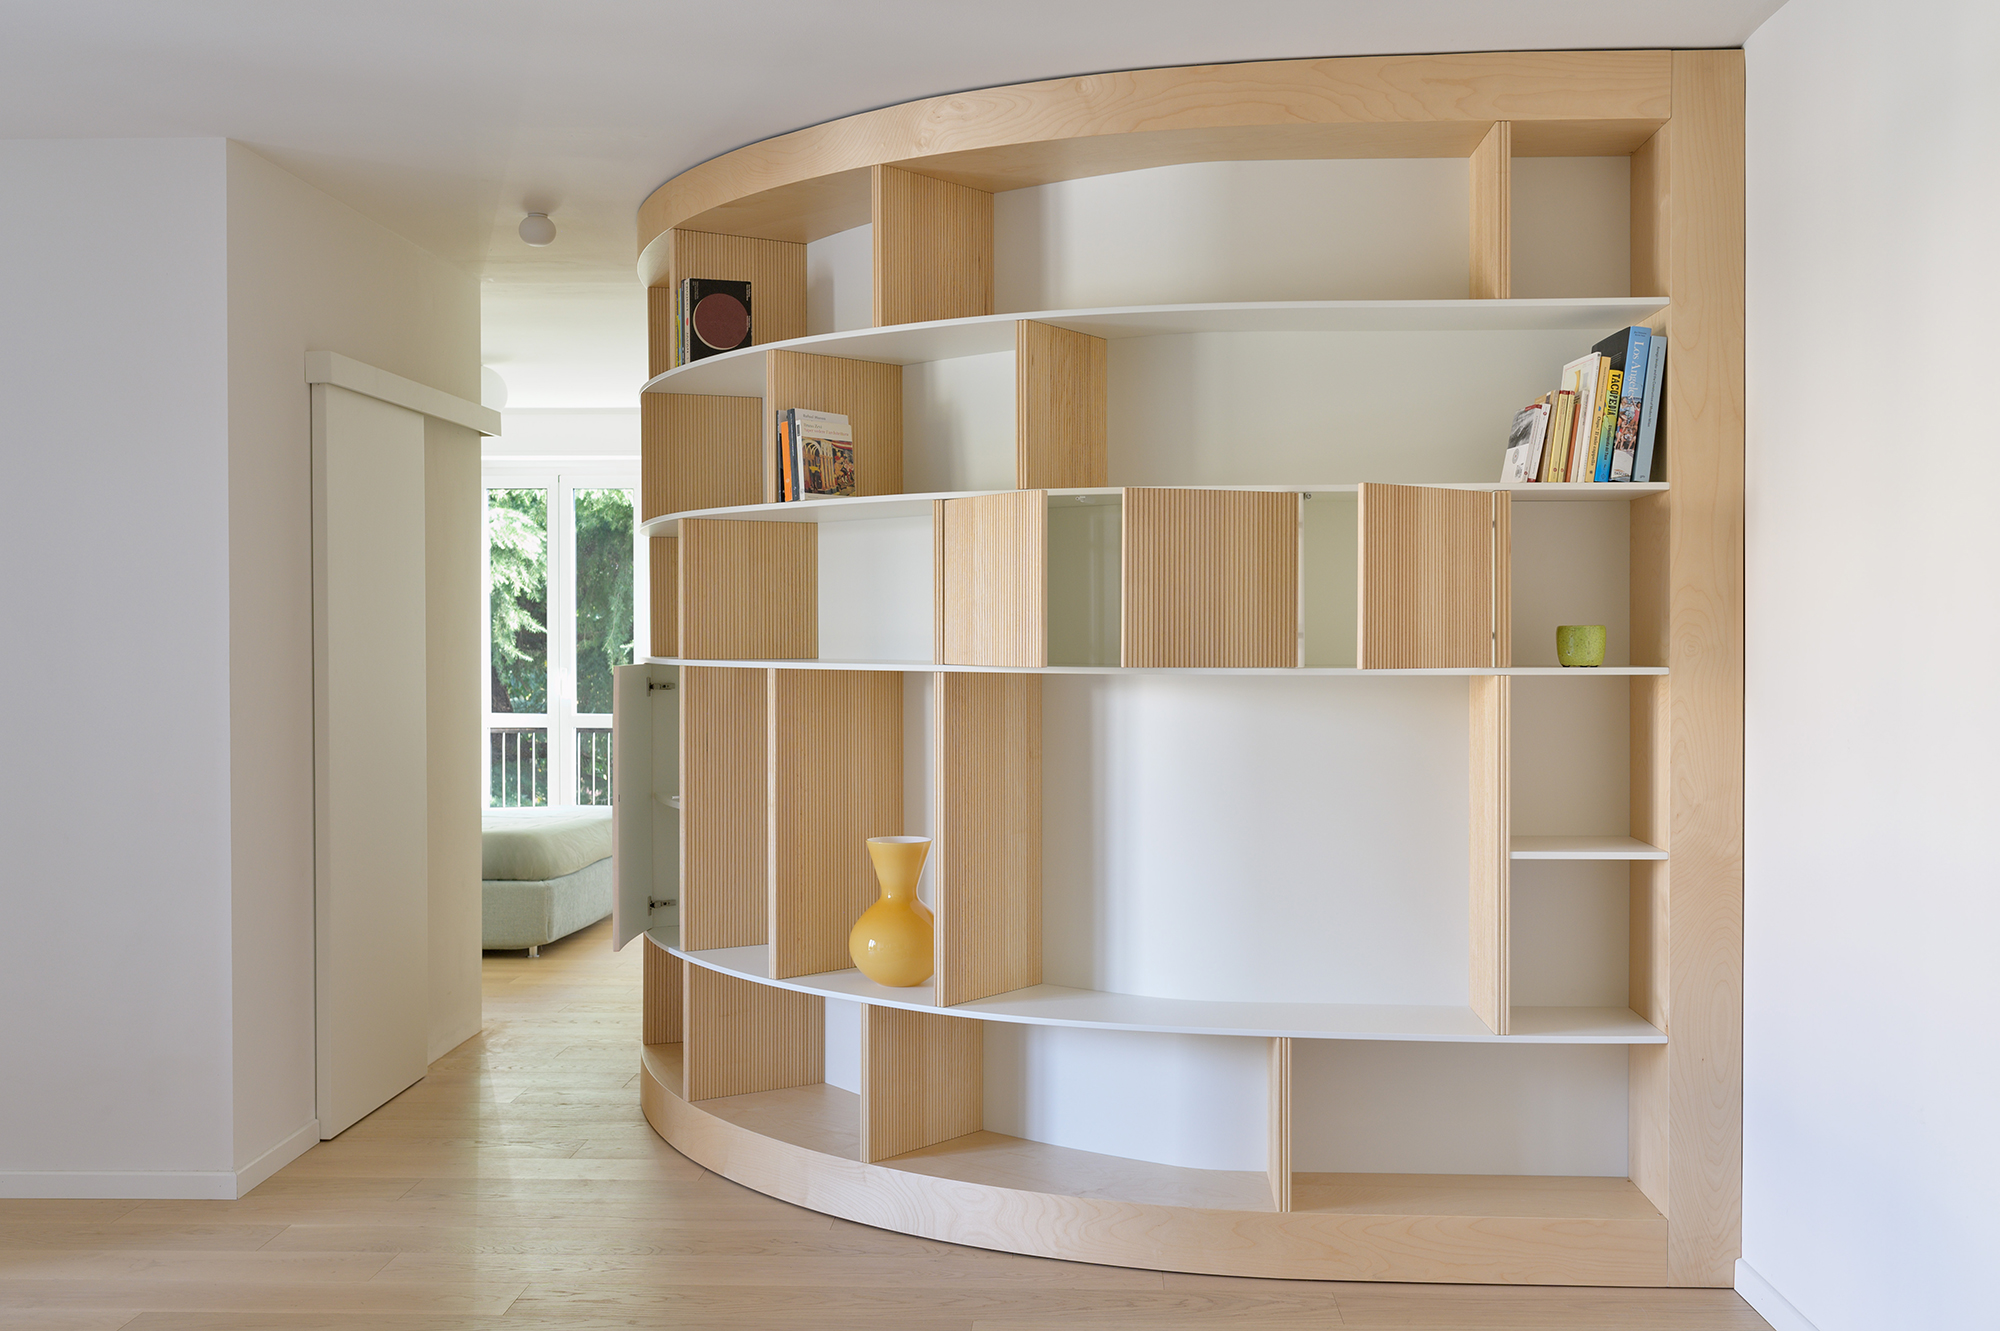 Apartment with a Library - Gessato